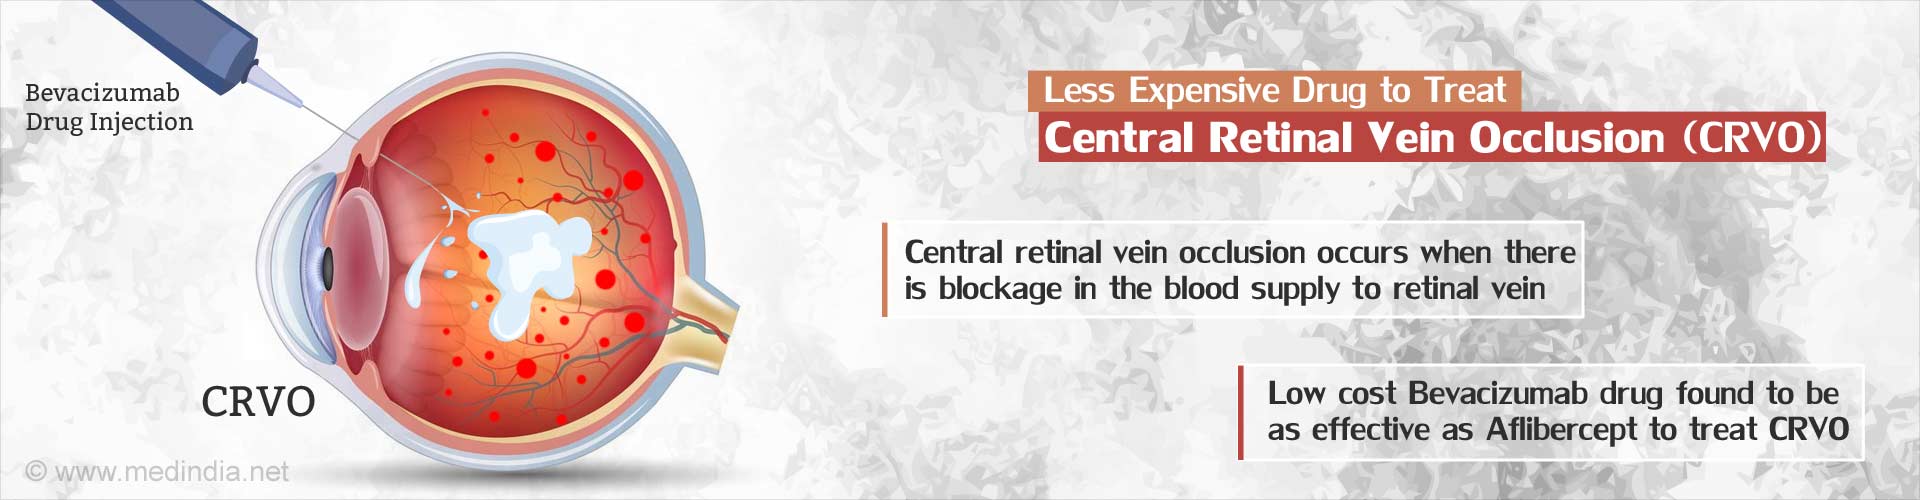 Less expensive drug to treat central retinal vein occlusion (CRVO)
- Central retinal vein occlusion occurs when there is blockage in the blood supply to retinal vein
- Low cost Bevacizumab drug found to be as effective as Aflibercept to treat CRVO